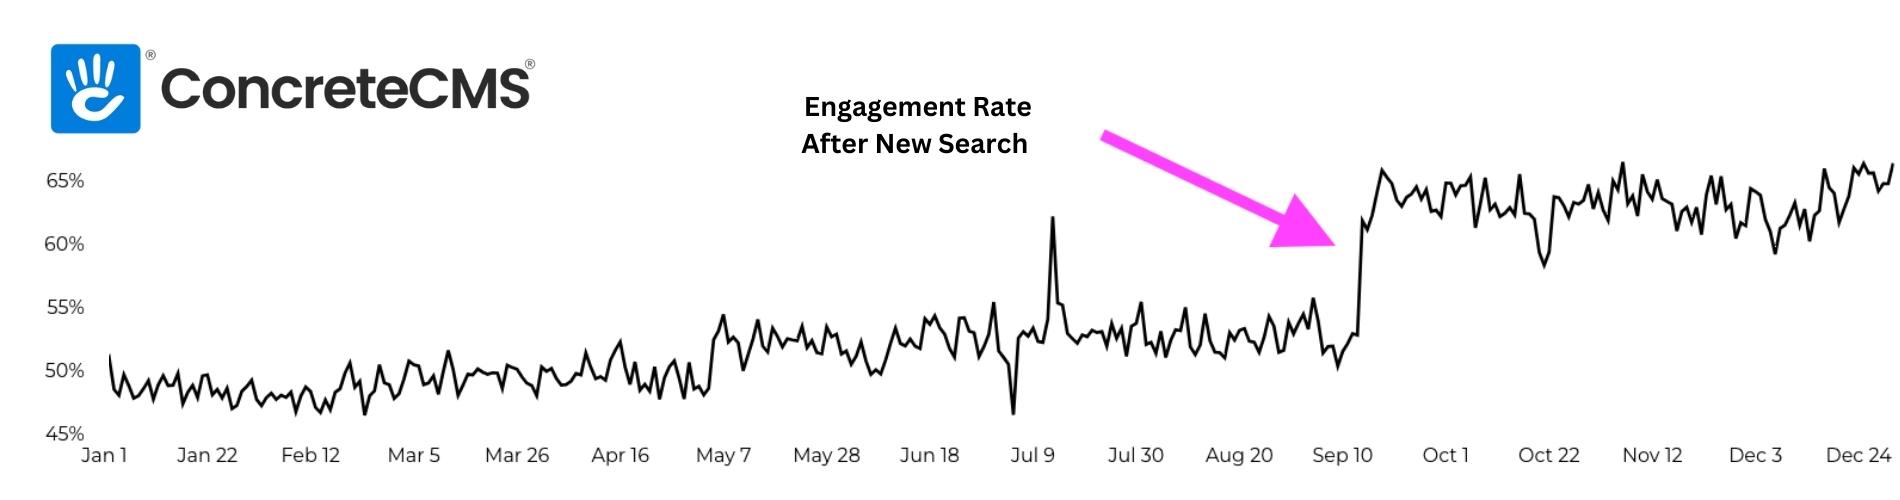 Engagement Rate After New Search.jpg